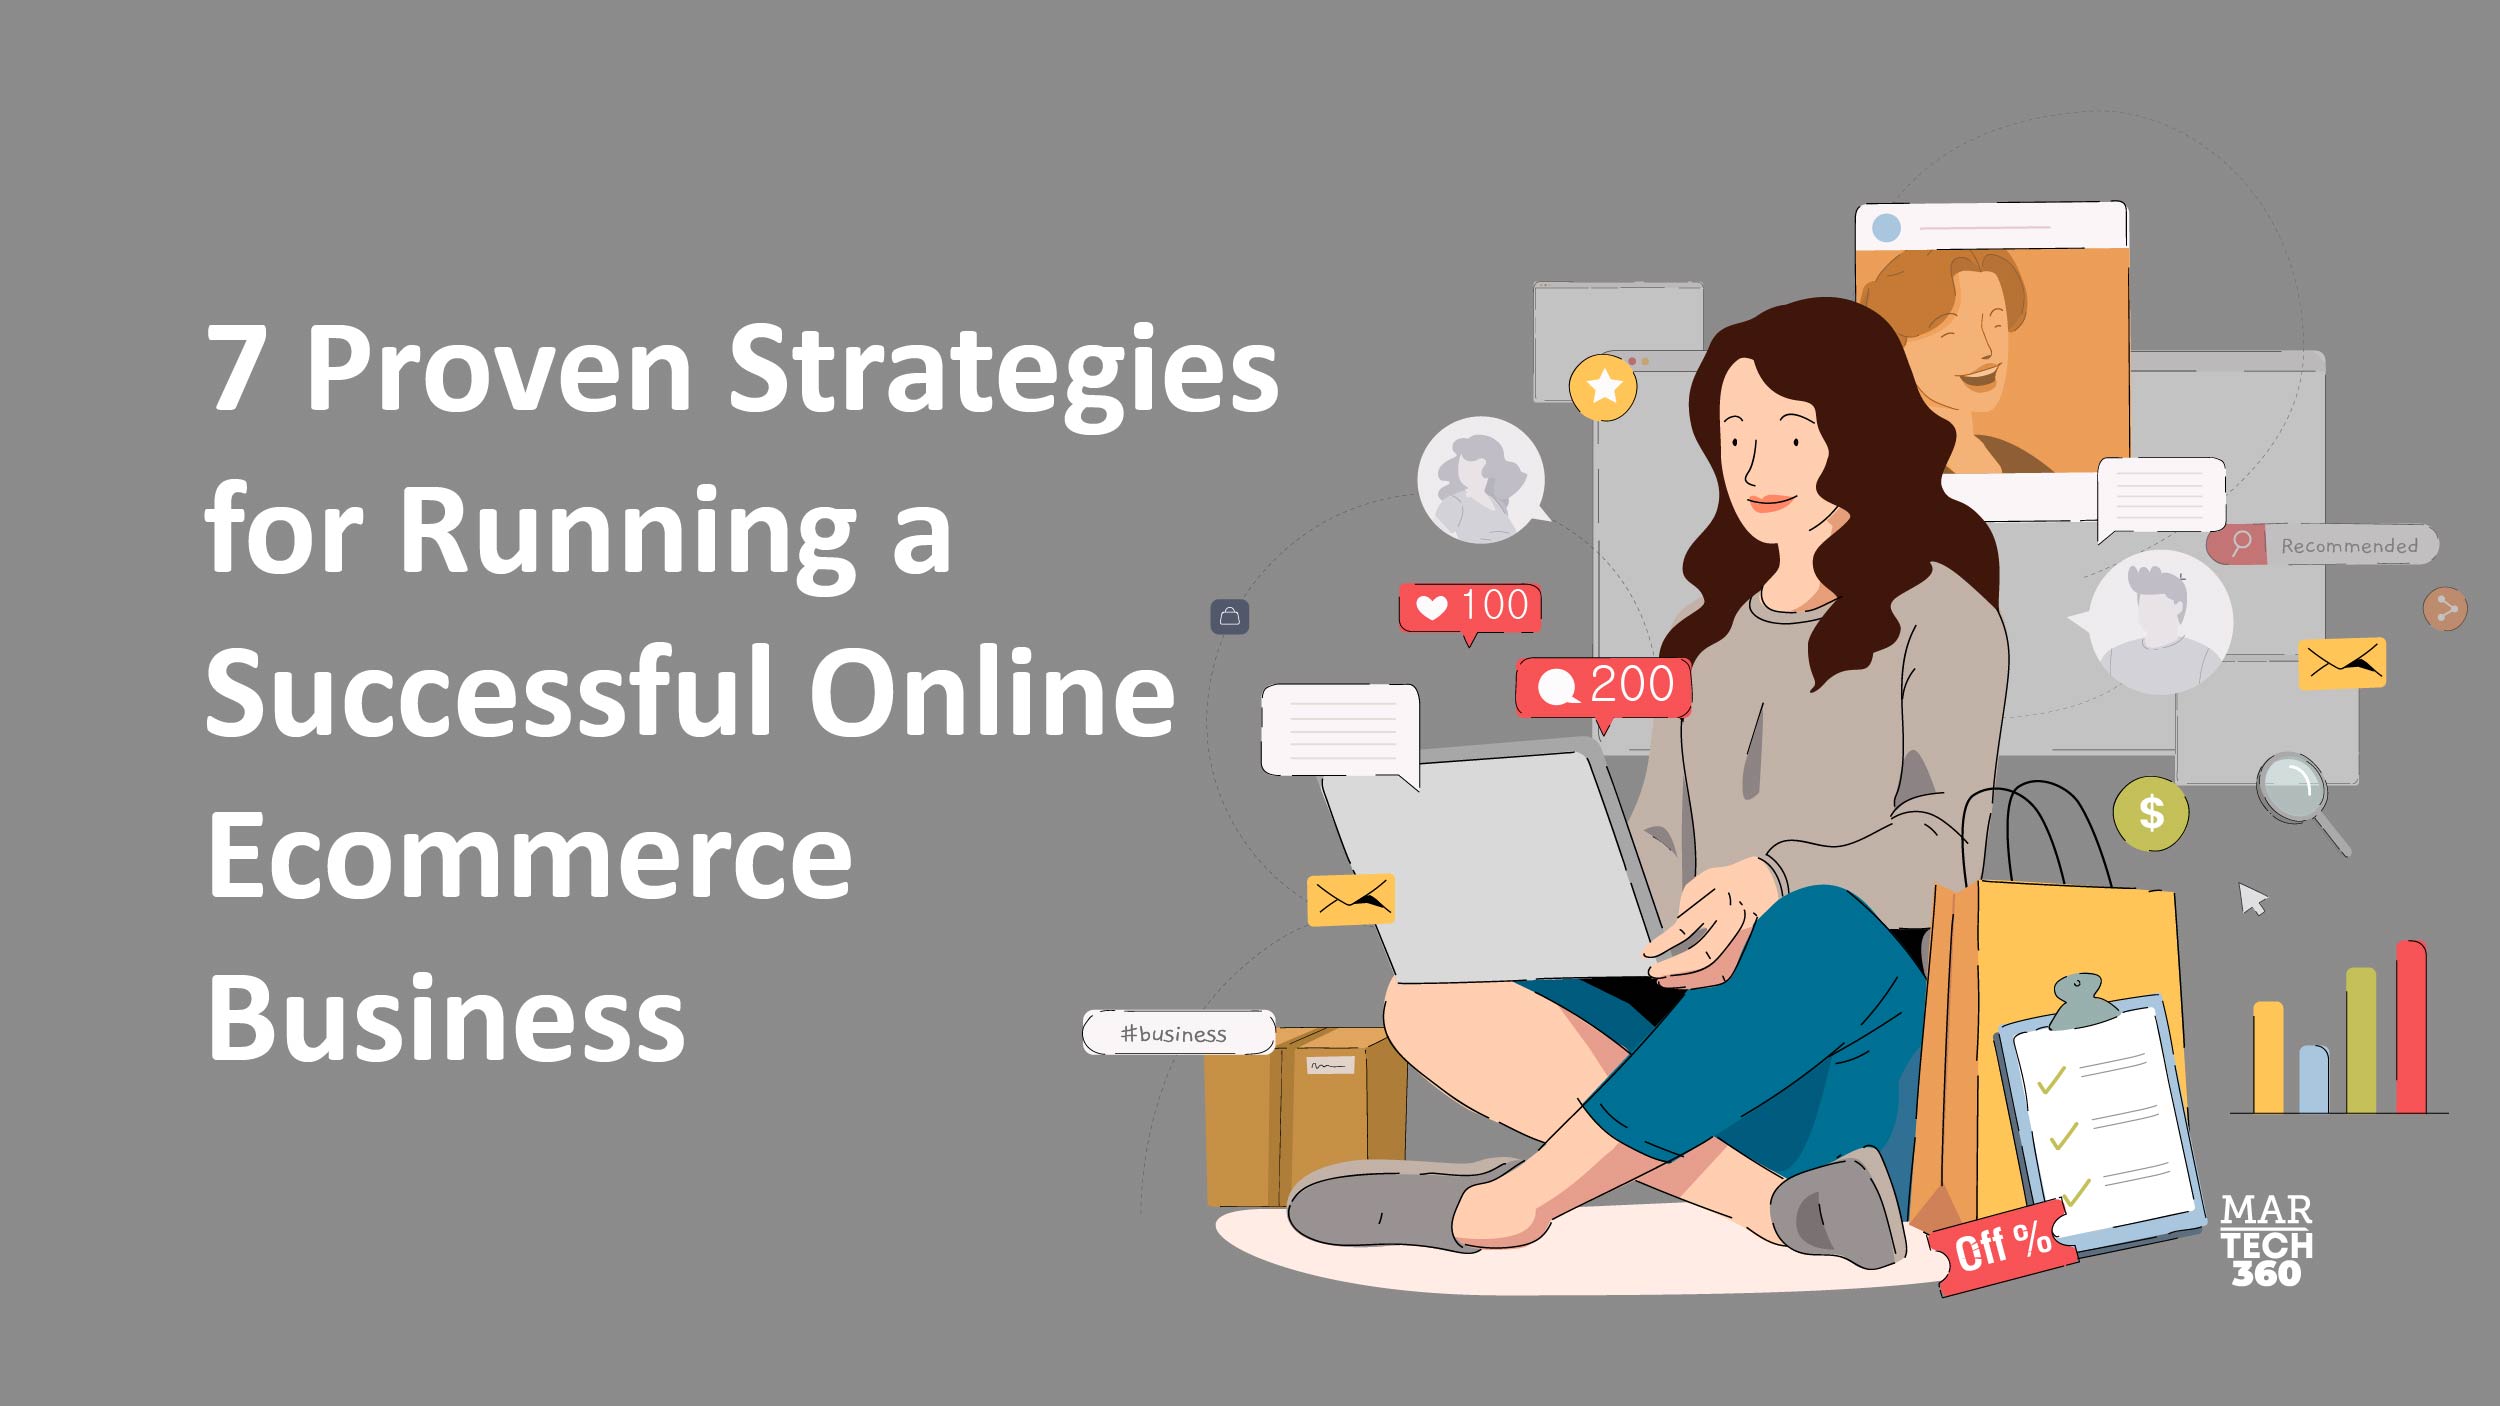 Online Ecommerce Business